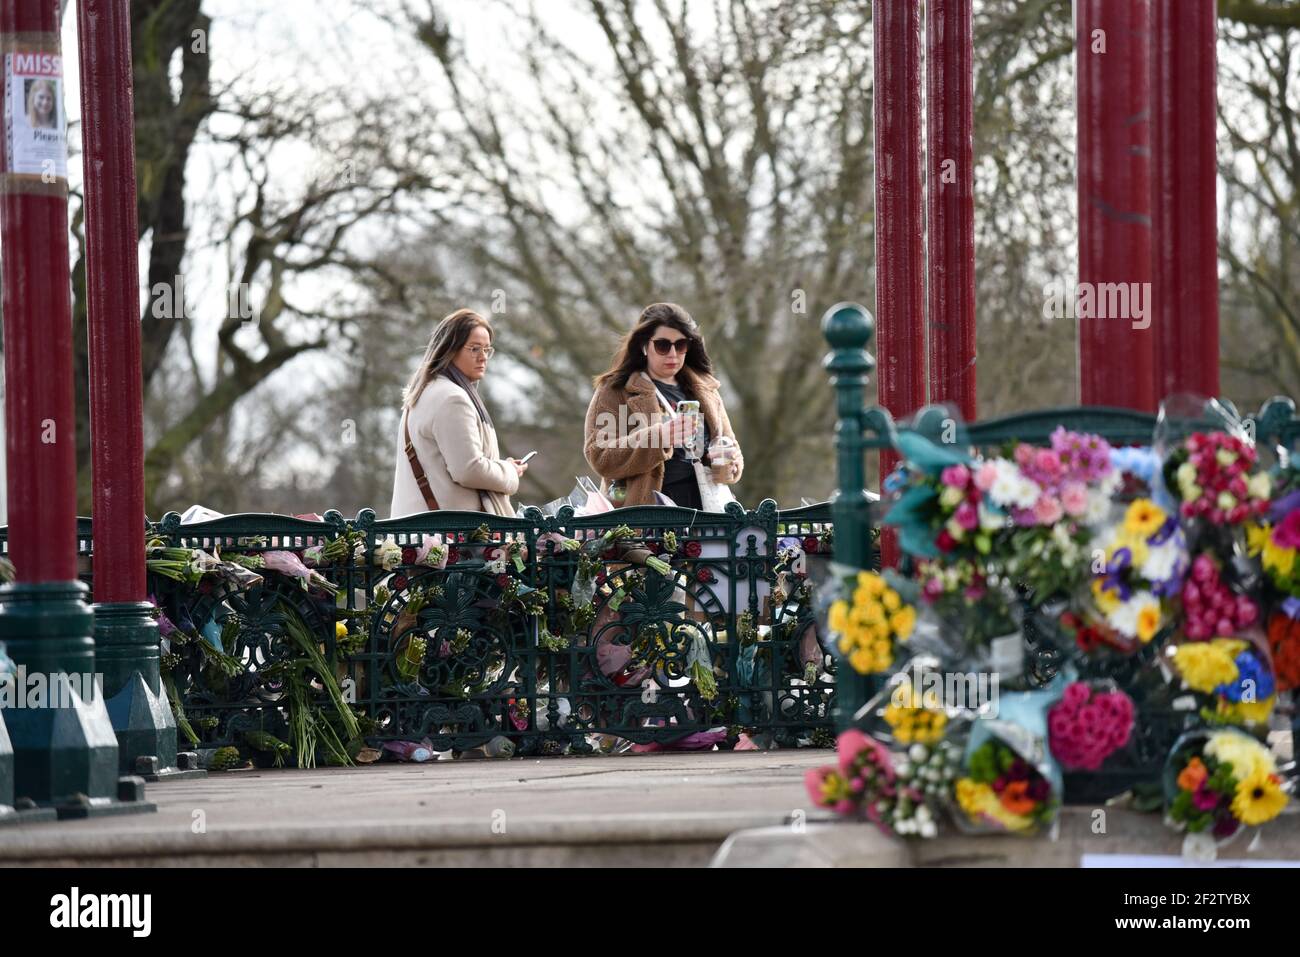 Clapham Common, London, UK. 13th Mar 2021. People paying their respects and laying floral tributes for Sarah Everard at the bandstand in Clapham Common. Credit: Matthew Chattle/Alamy Live News Stock Photo